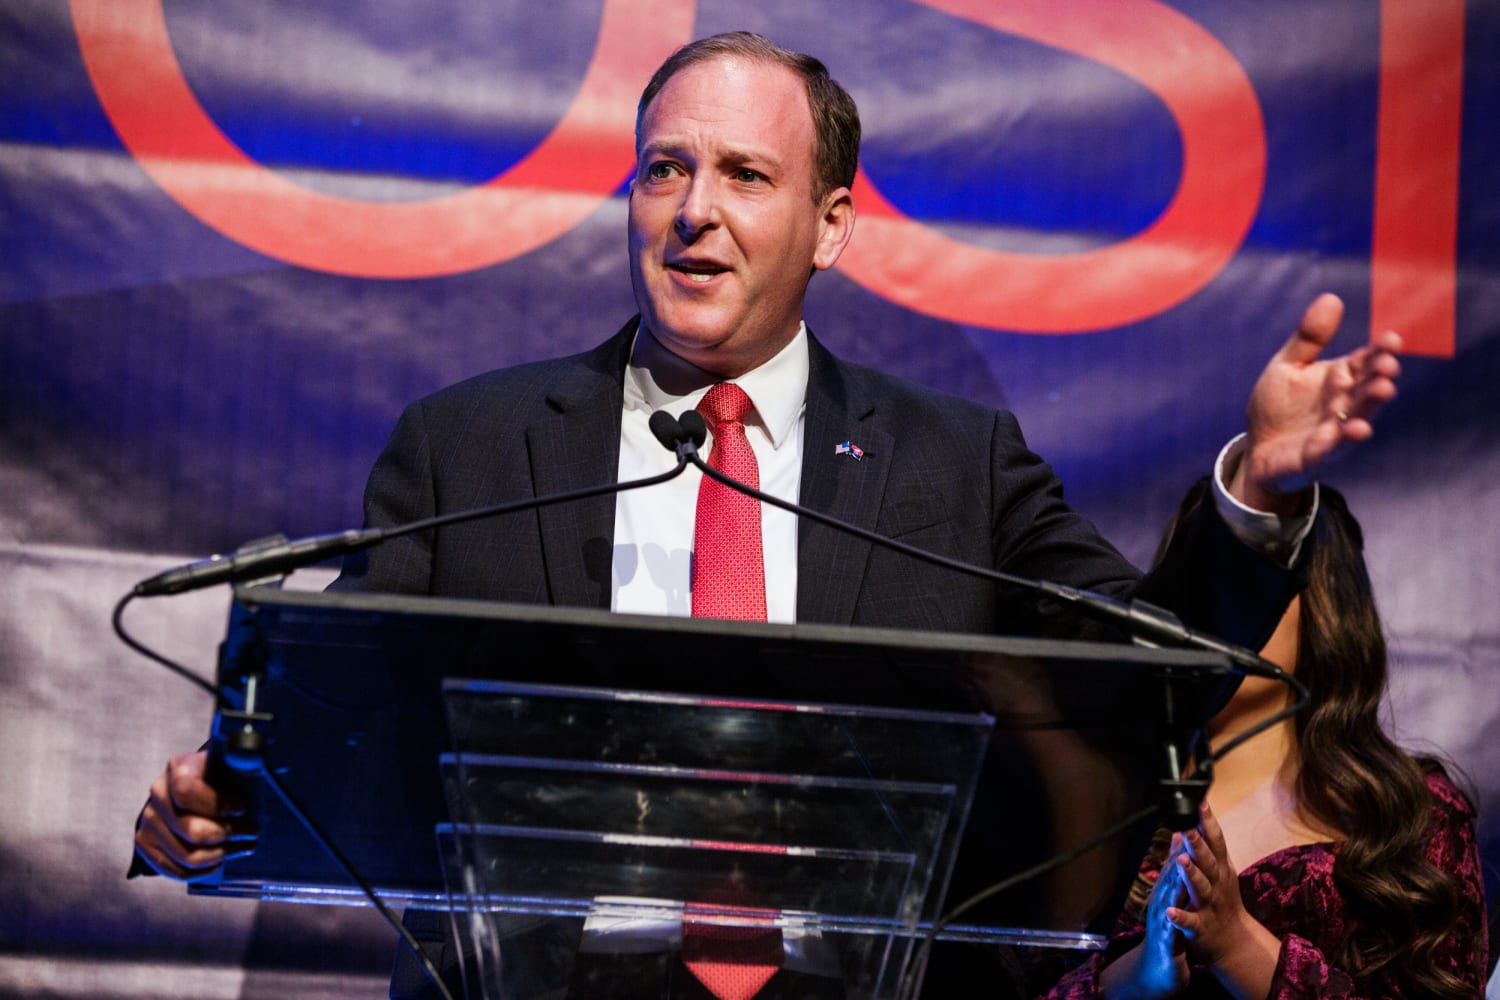 Rep. Zeldin taking supporters' calls about running for RNC chair, longtime  adviser says